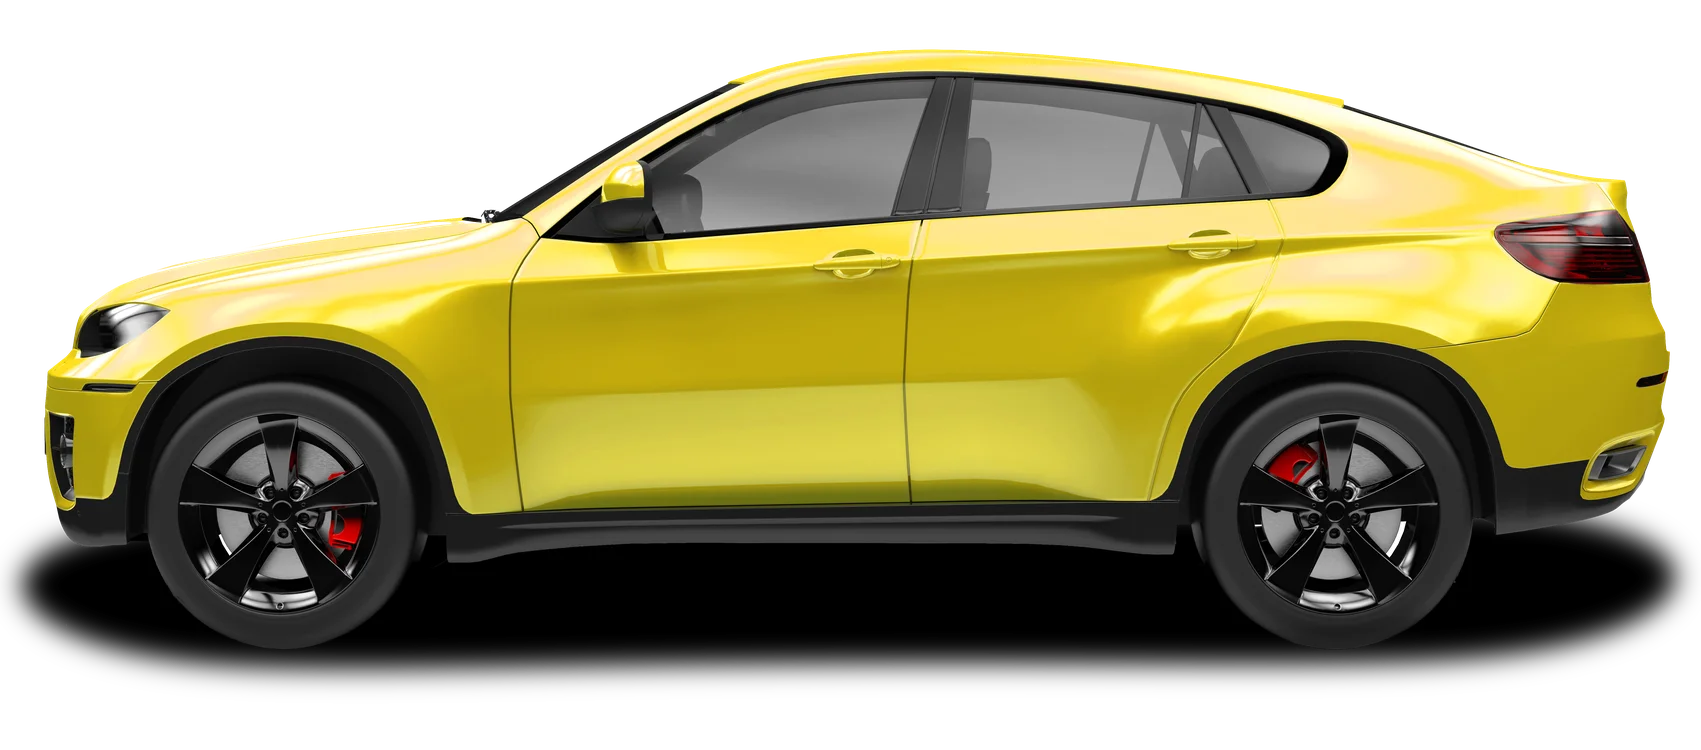 Side profile of a yellow BMW X6